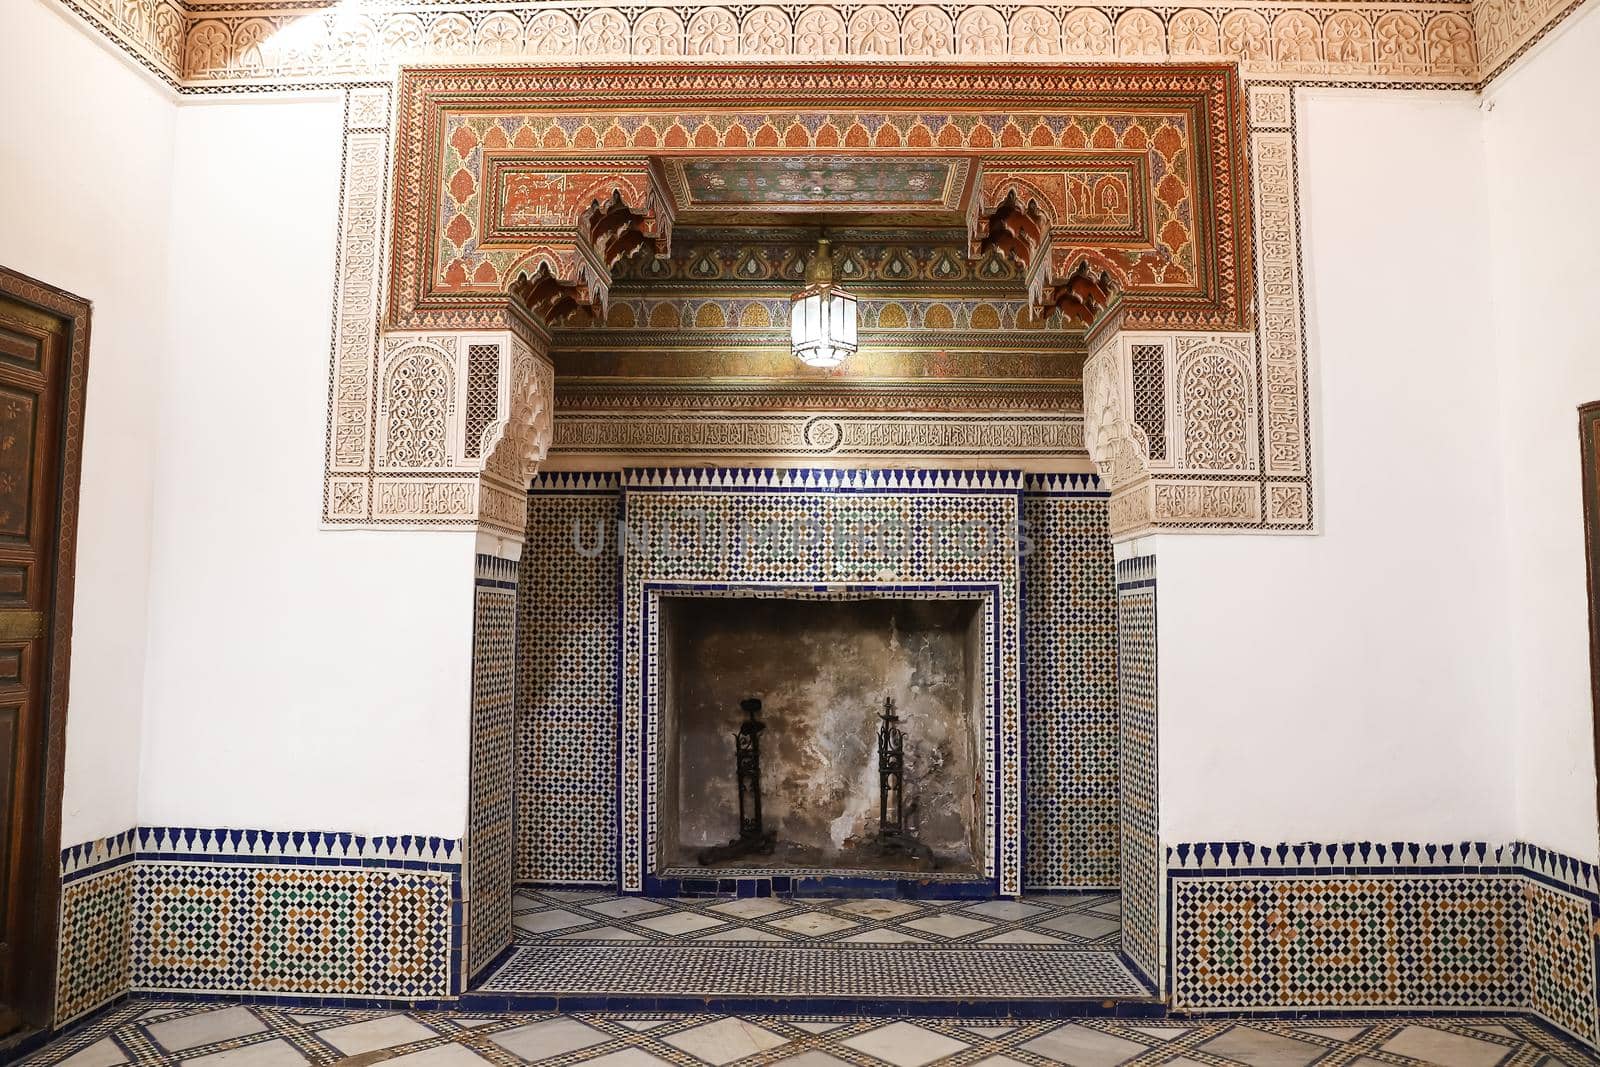 Bahia Palace in Marrakech City in Morocco